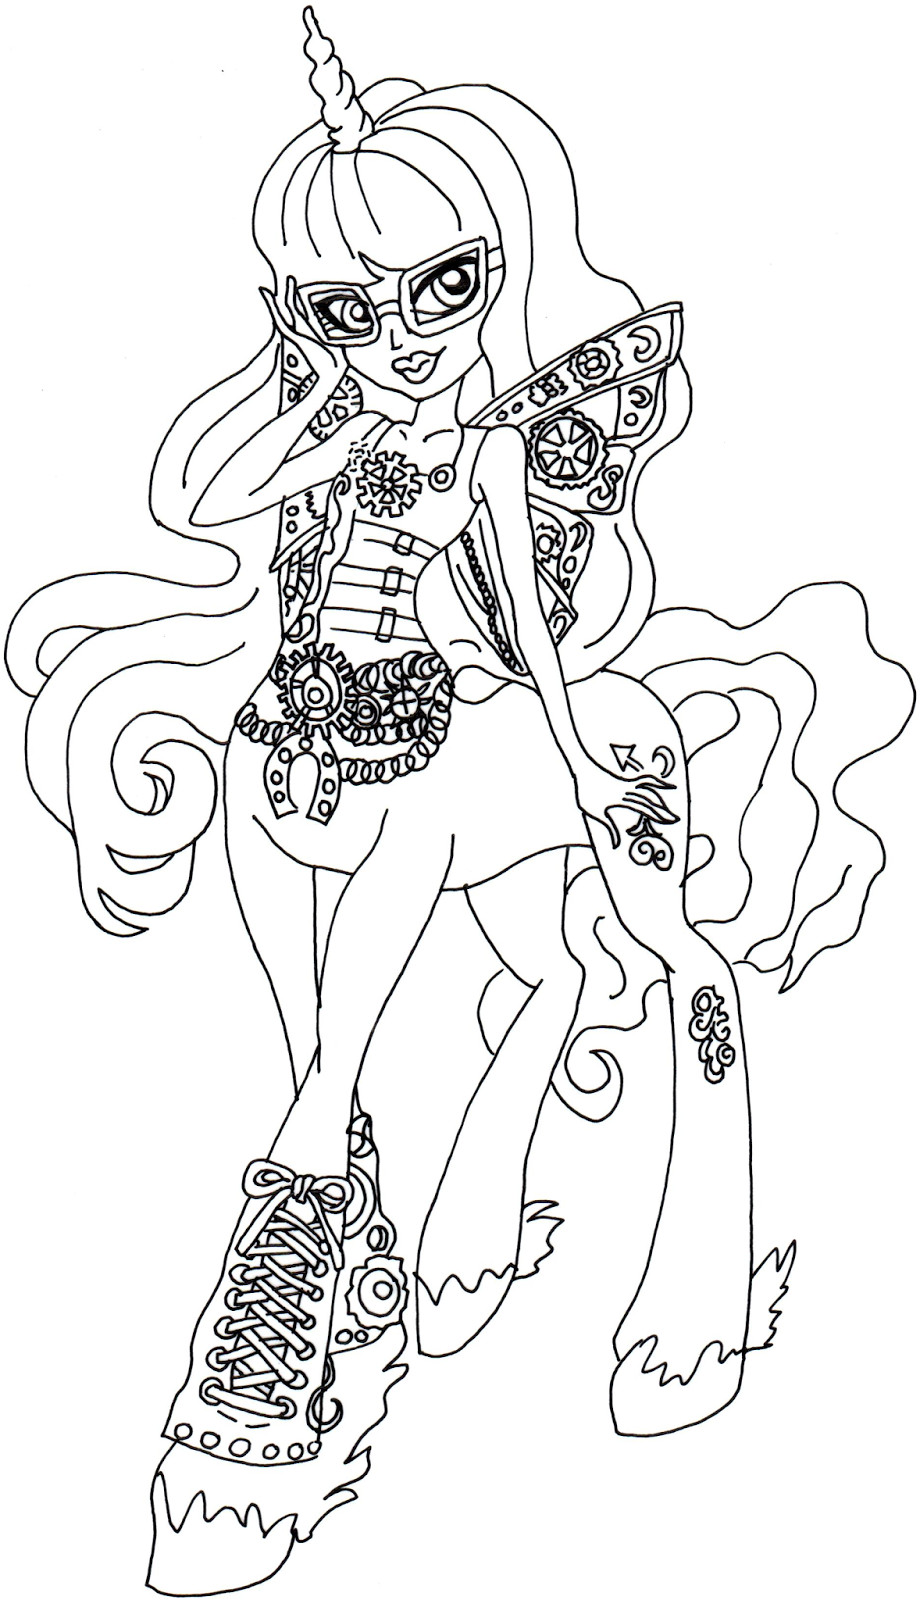 Free Printable Coloring Sheets Monster High
 Free Printable Monster High Coloring Pages November 2015